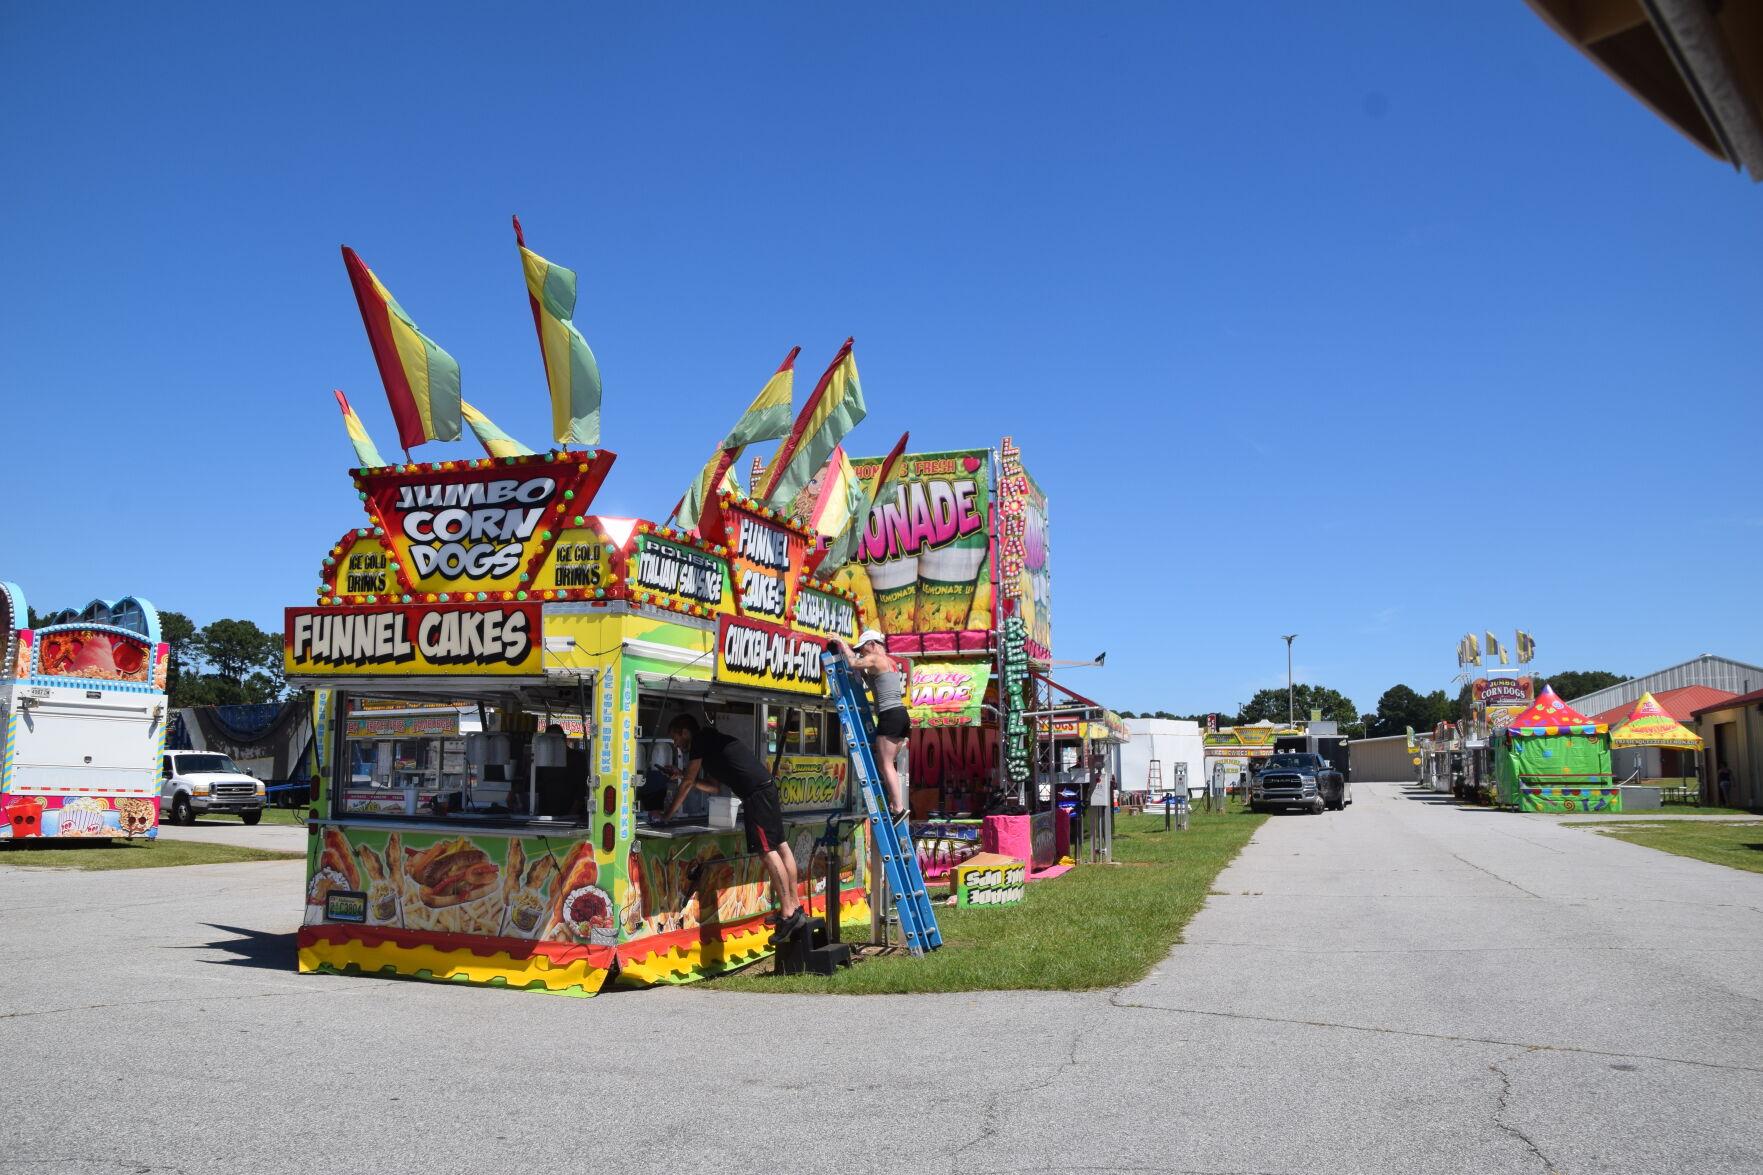 Gwinnett County Fair opens this weekend with new safety rules